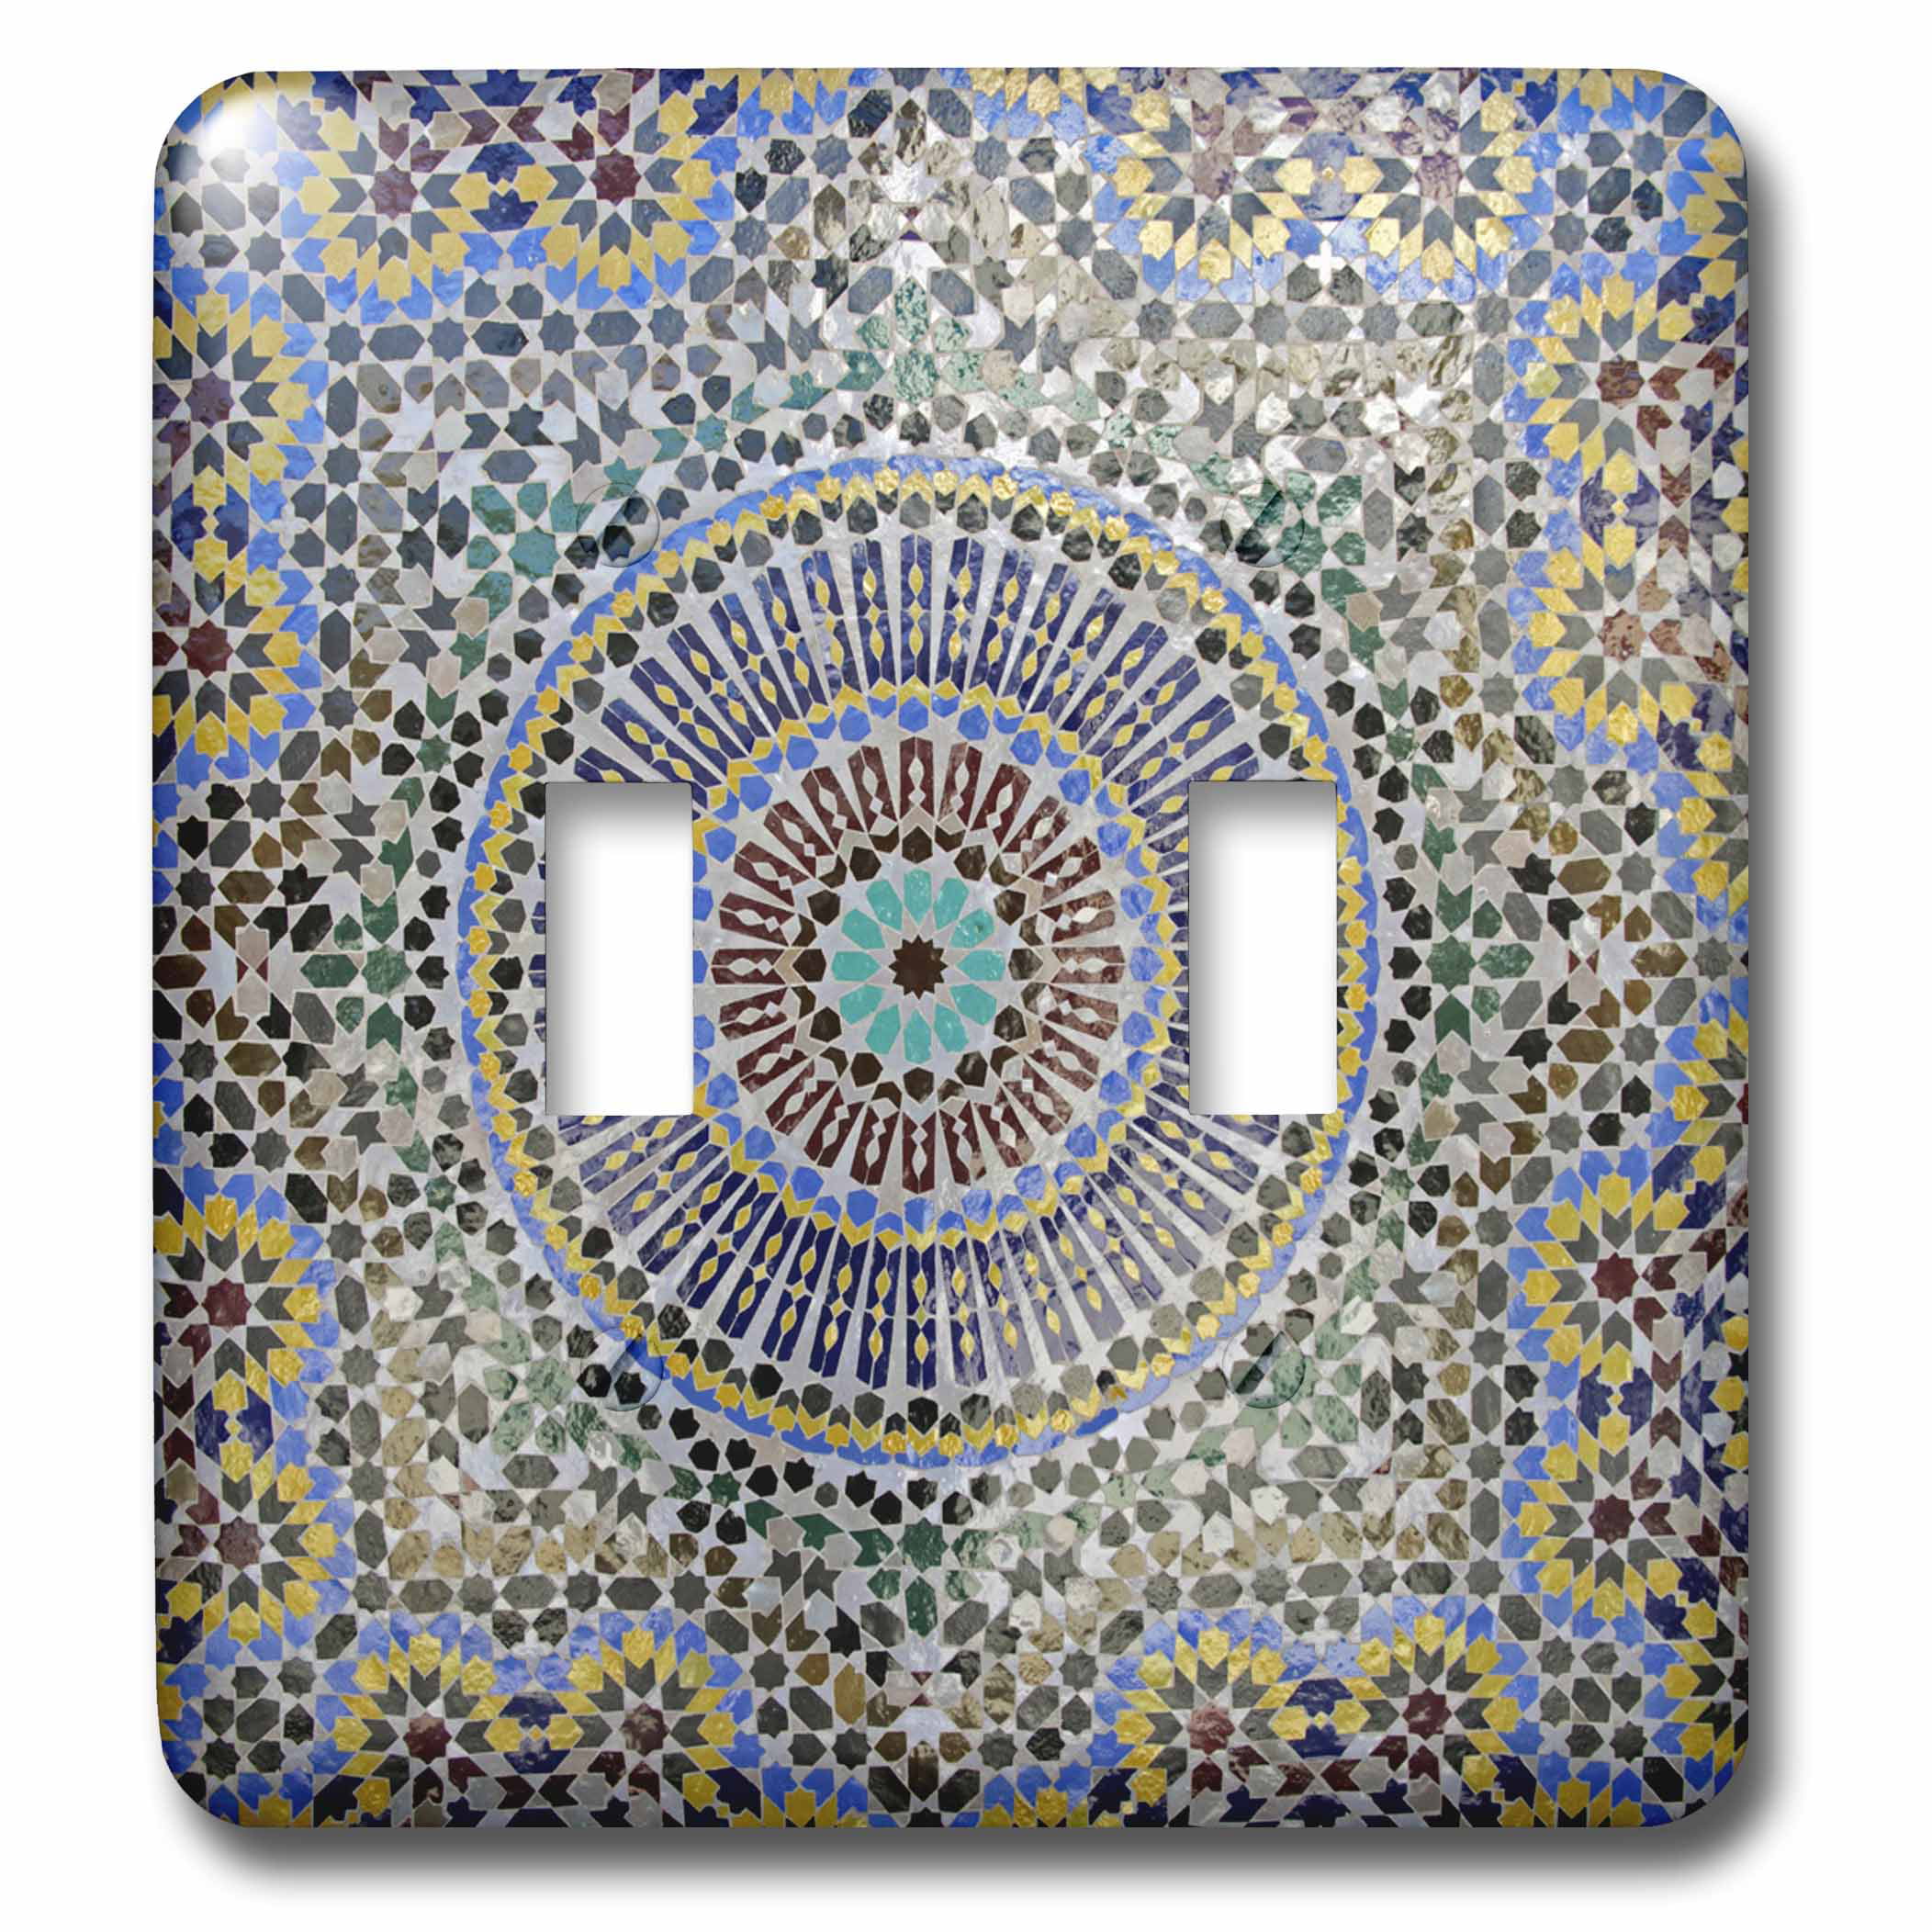 Morocco 3dRose lsp_132003_1 Mosaic Wall for Fountain Africa Af29 Kwi0083 Kymri Wilt Light Switch Cover Fes